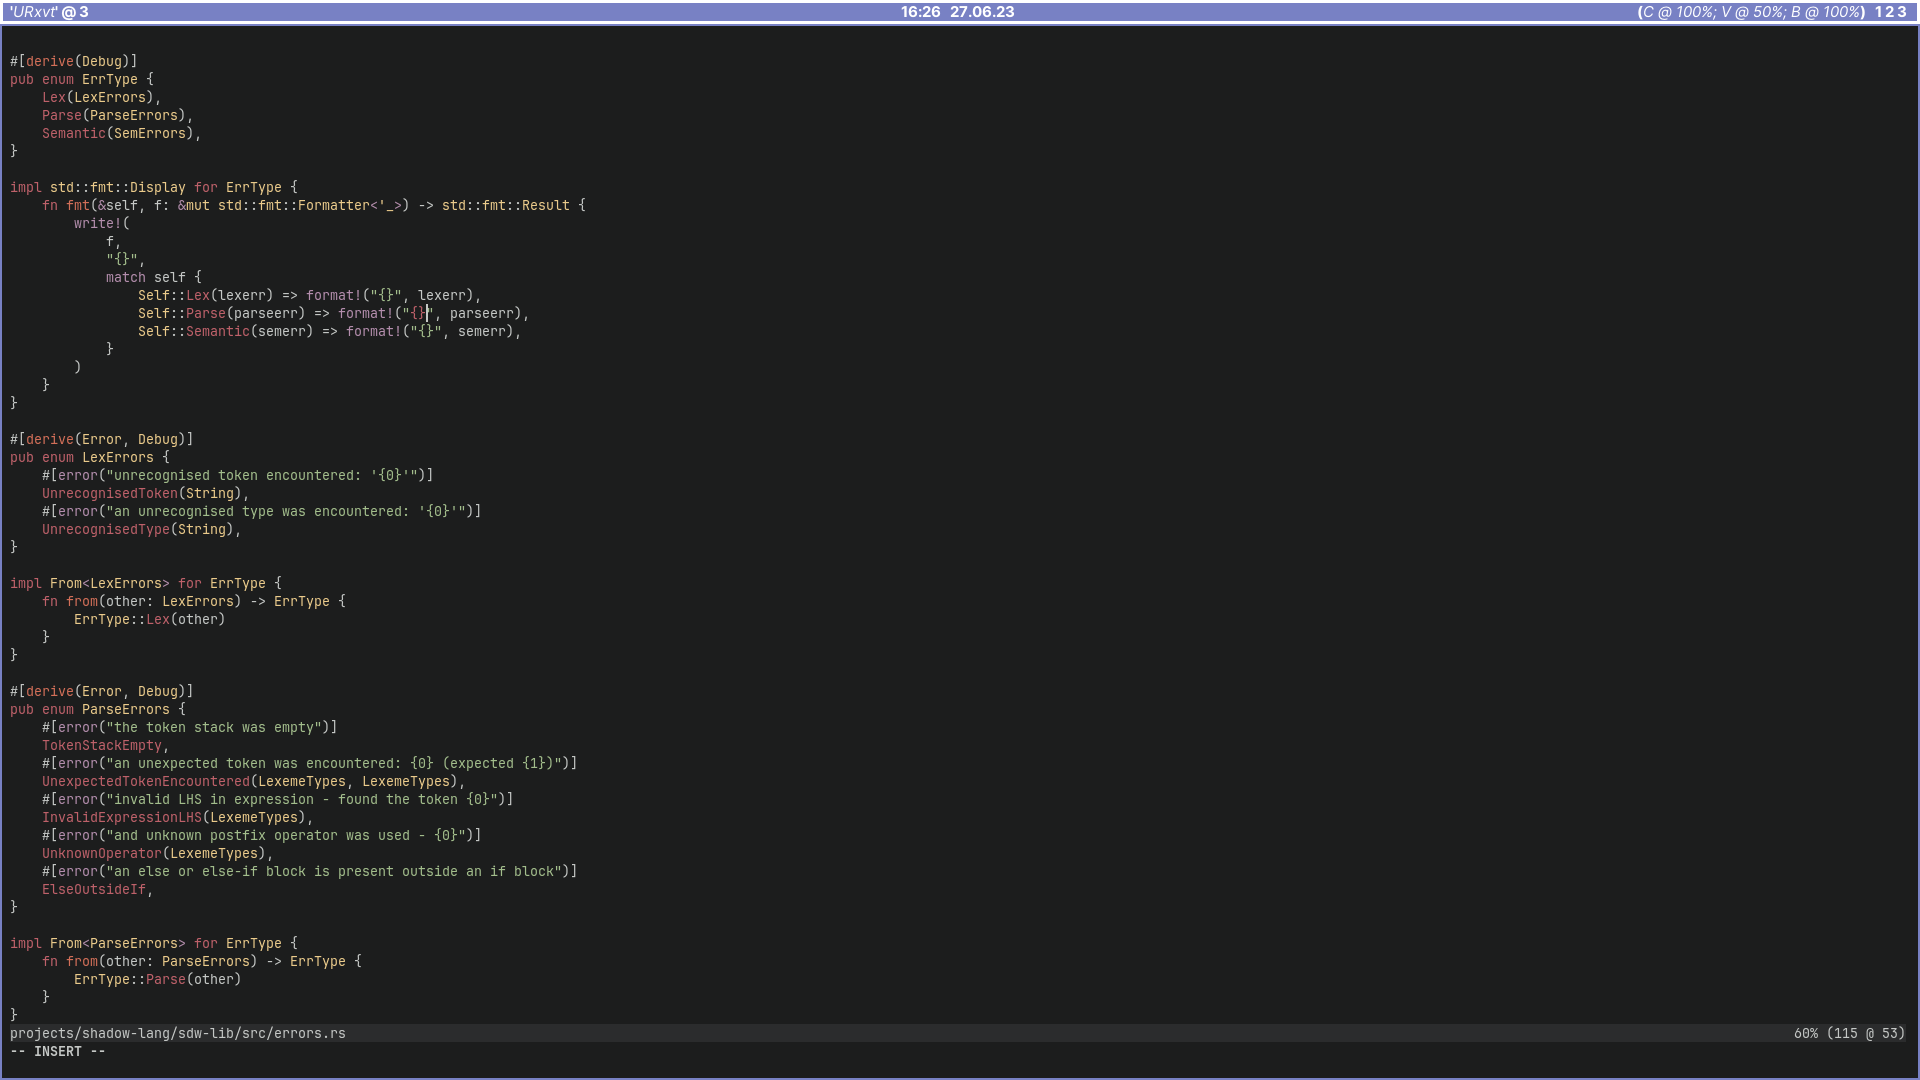 editing a nondescript rust file in neovim. the colours vaguely match the wallpaper aesthetic